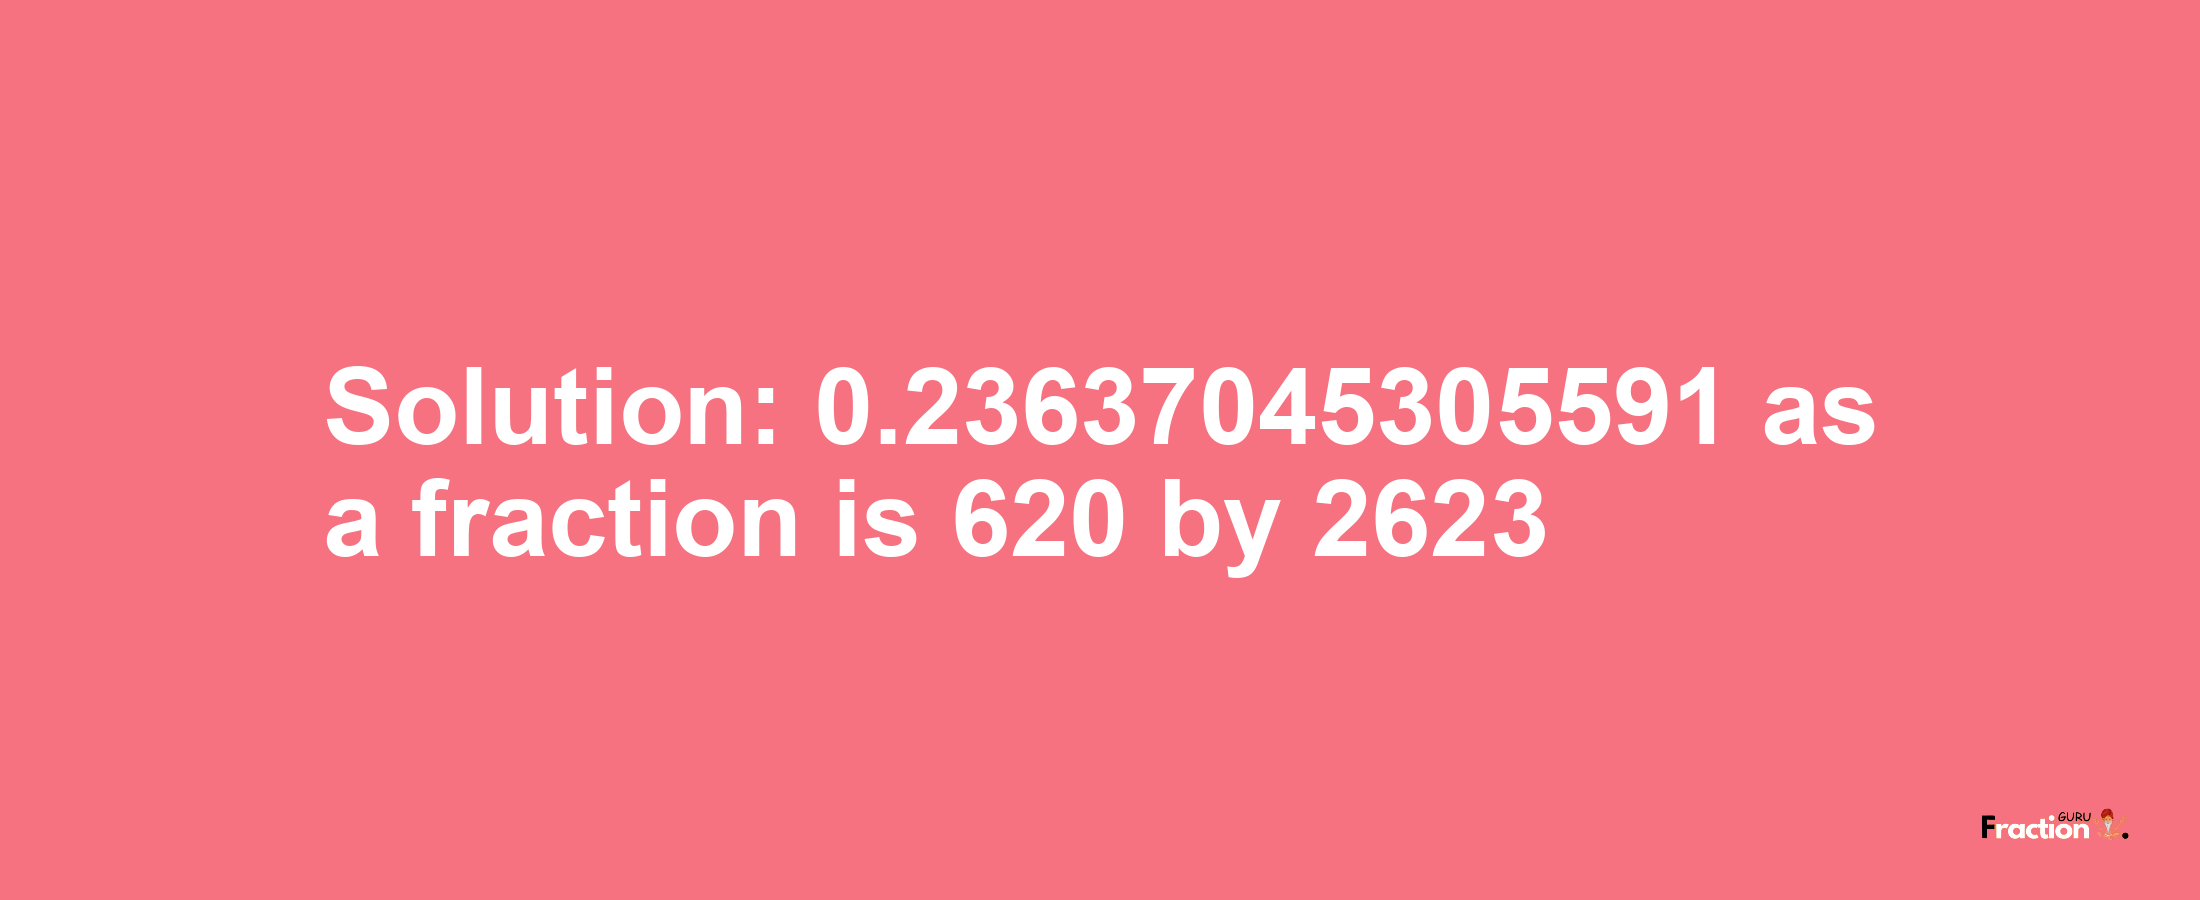 Solution:0.23637045305591 as a fraction is 620/2623